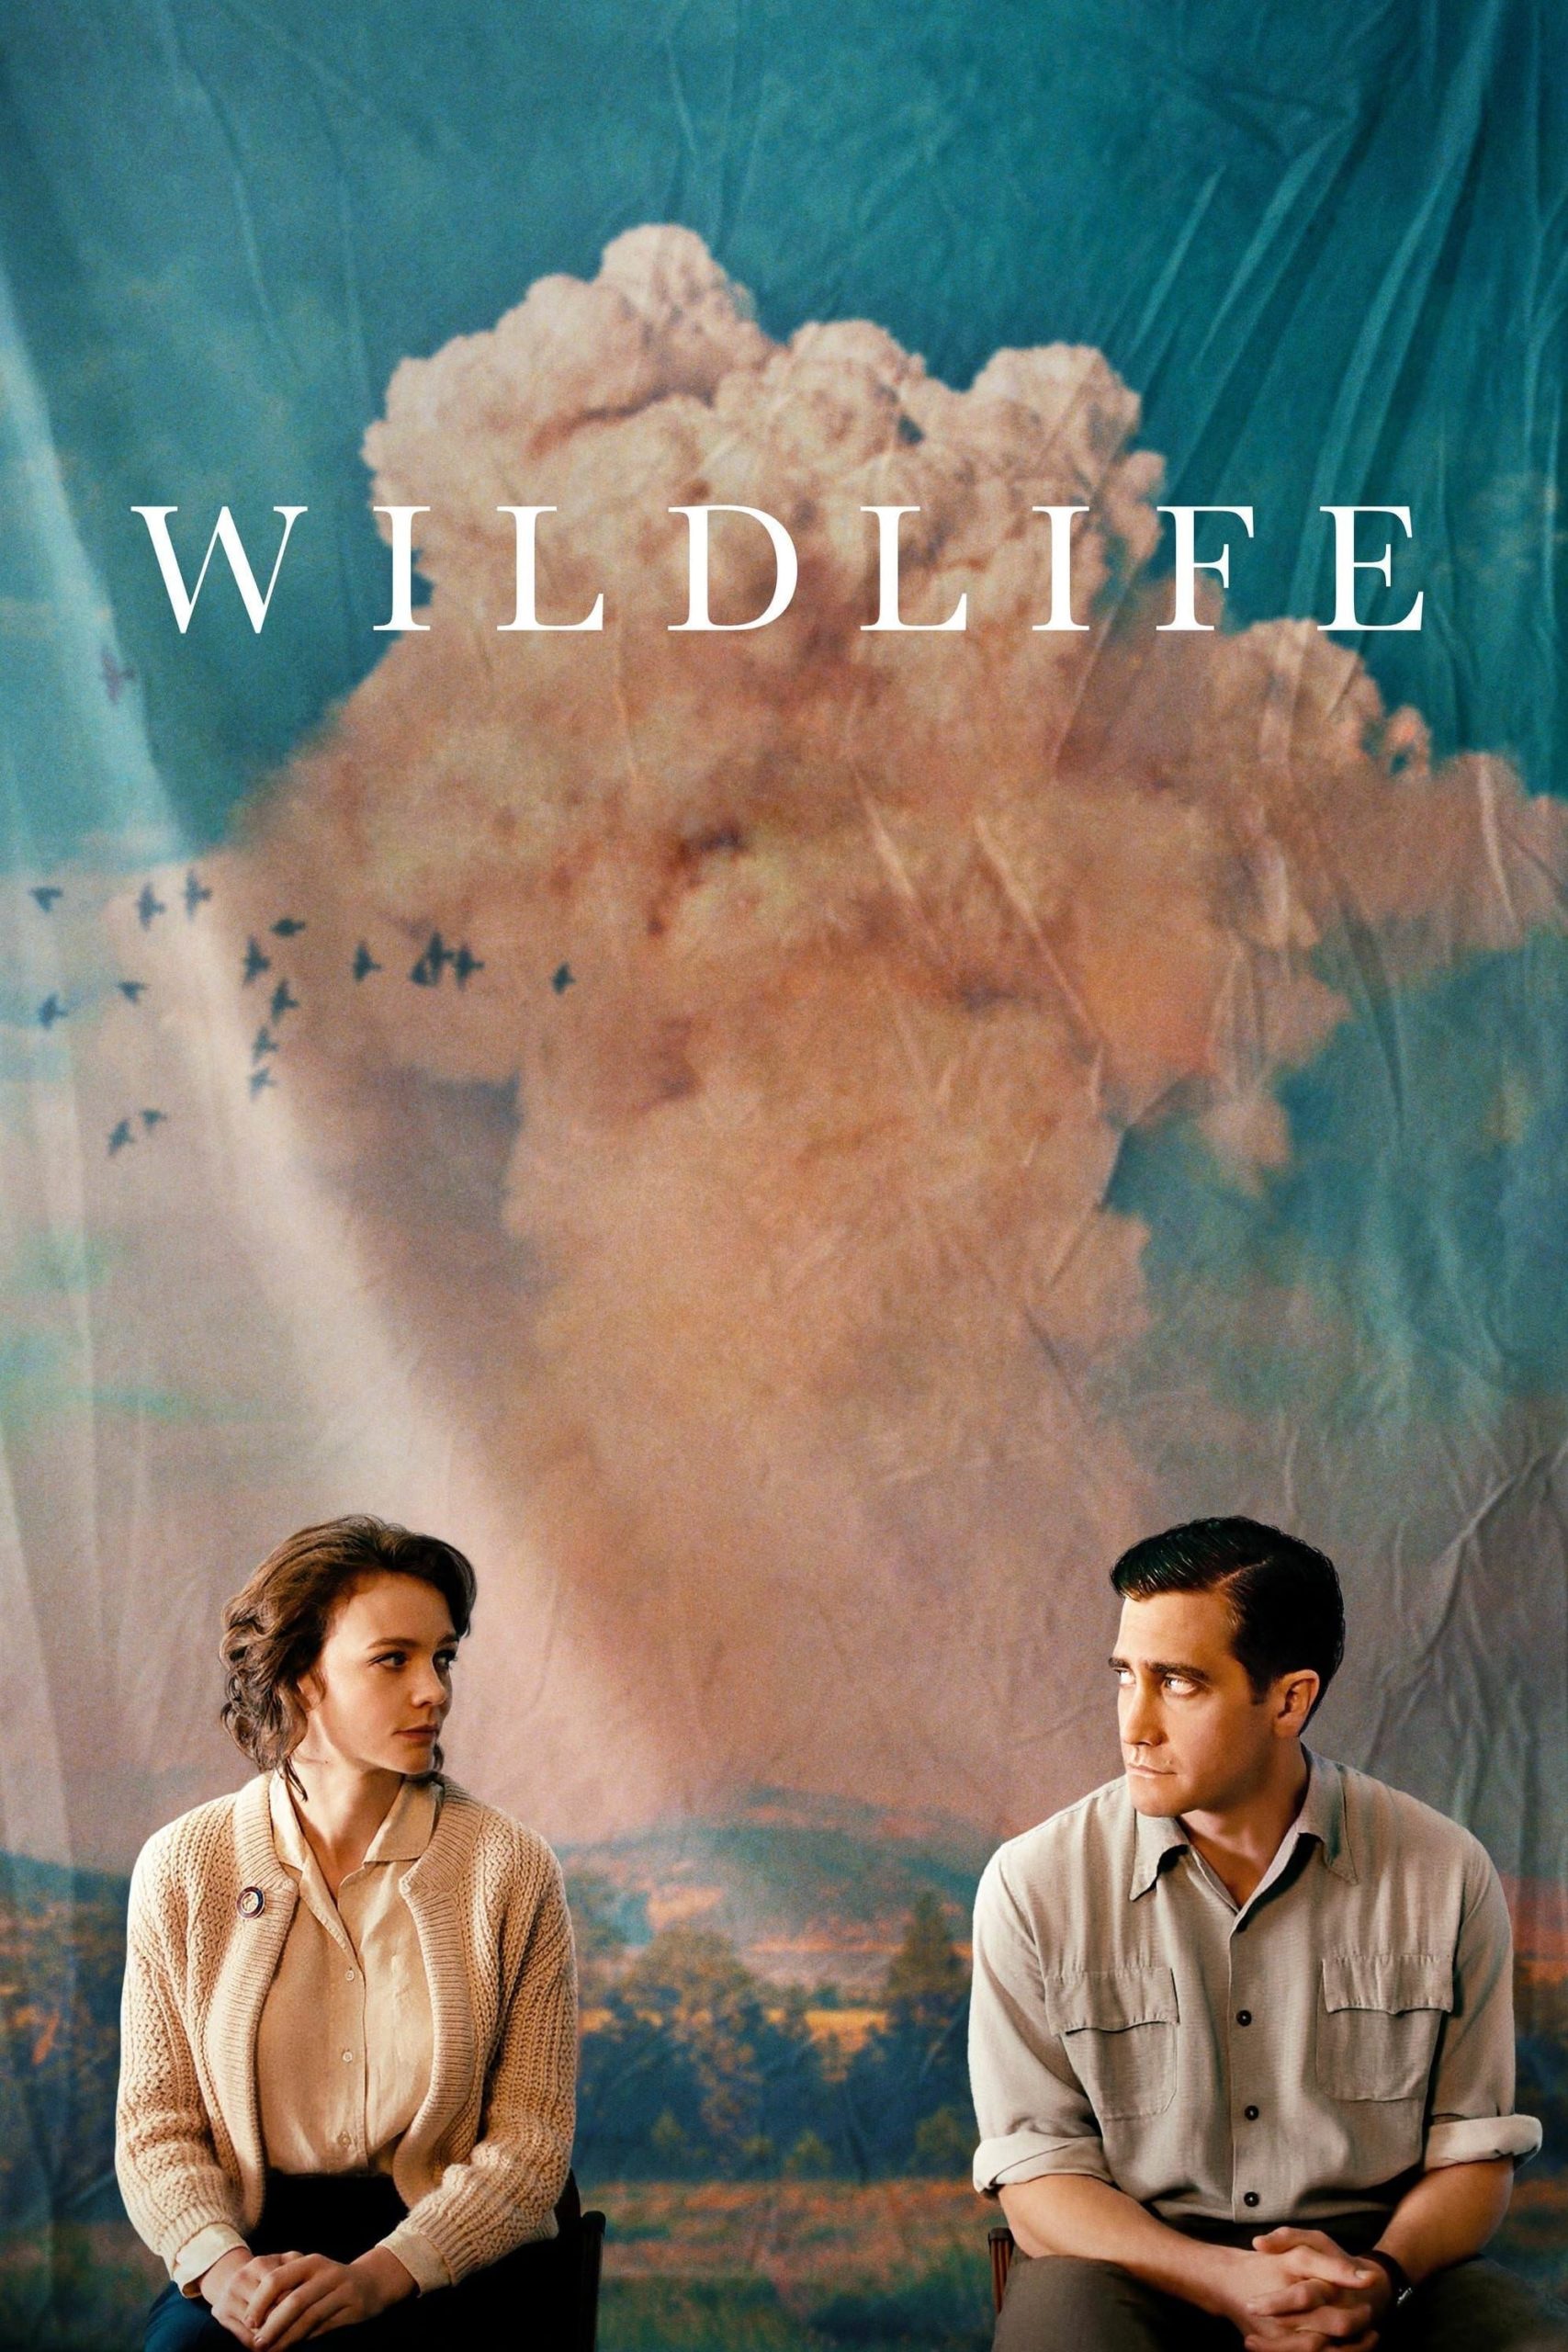 Poster for the movie "Wildlife"